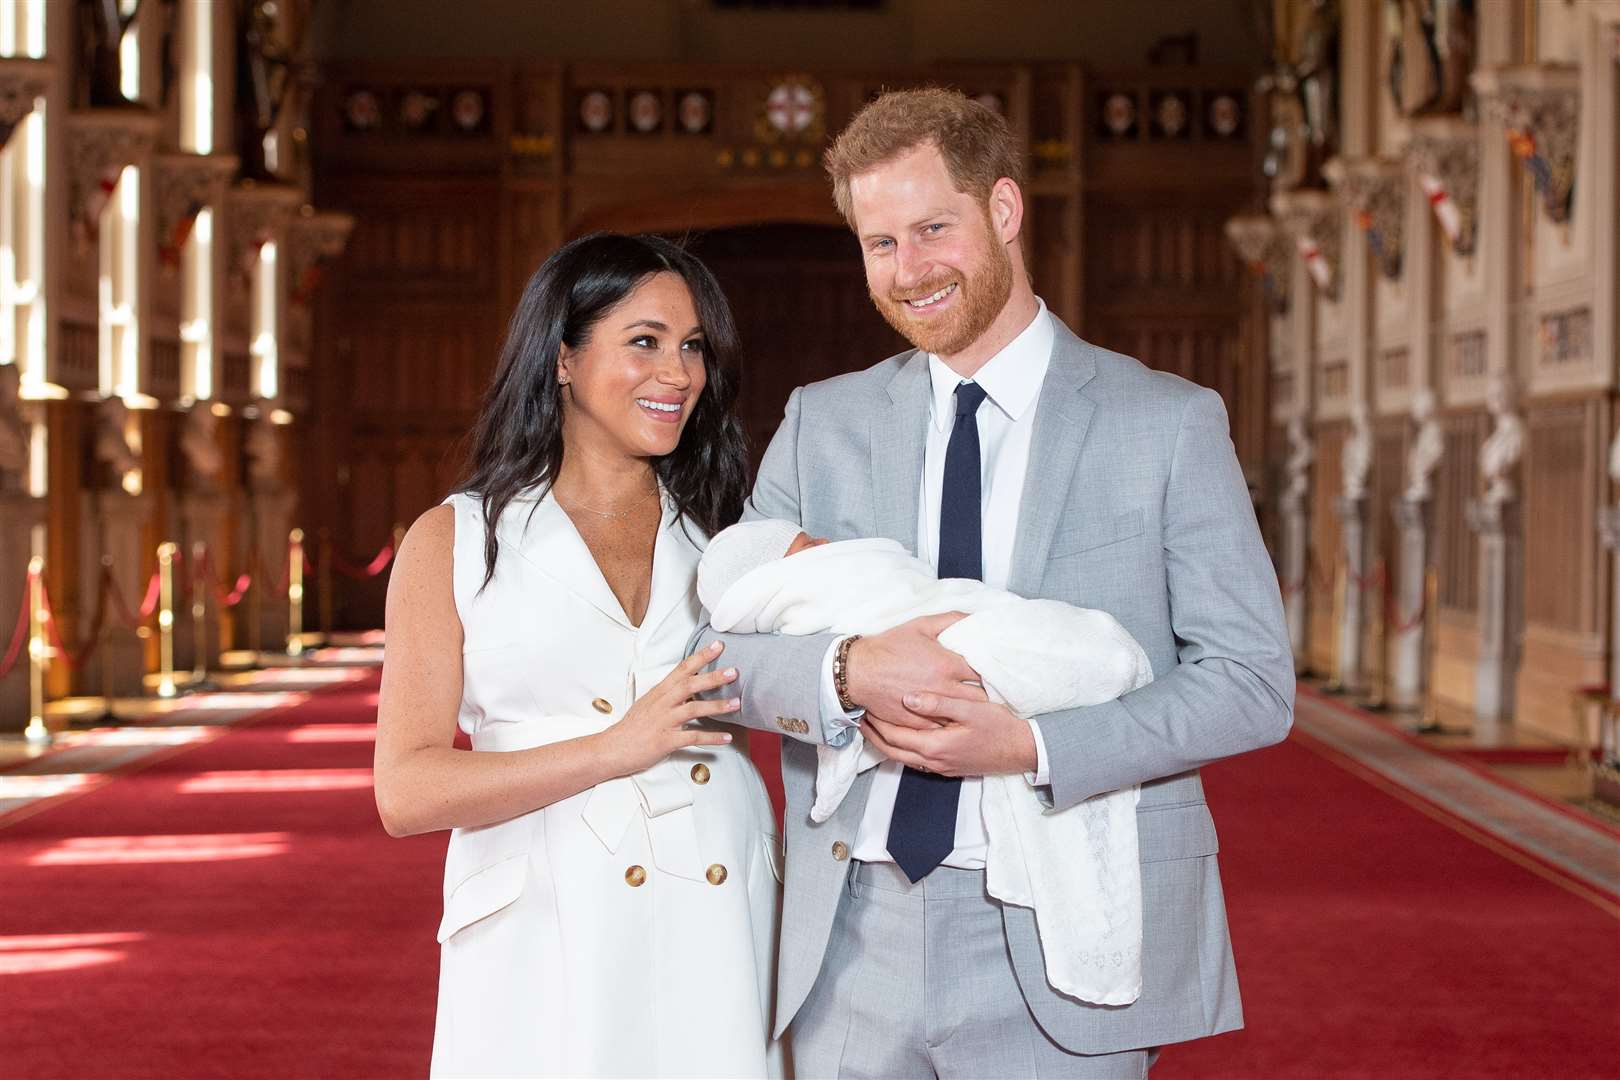 Meghan and Harry show off their newborn son to the world (Dominic Lipinski/PA)